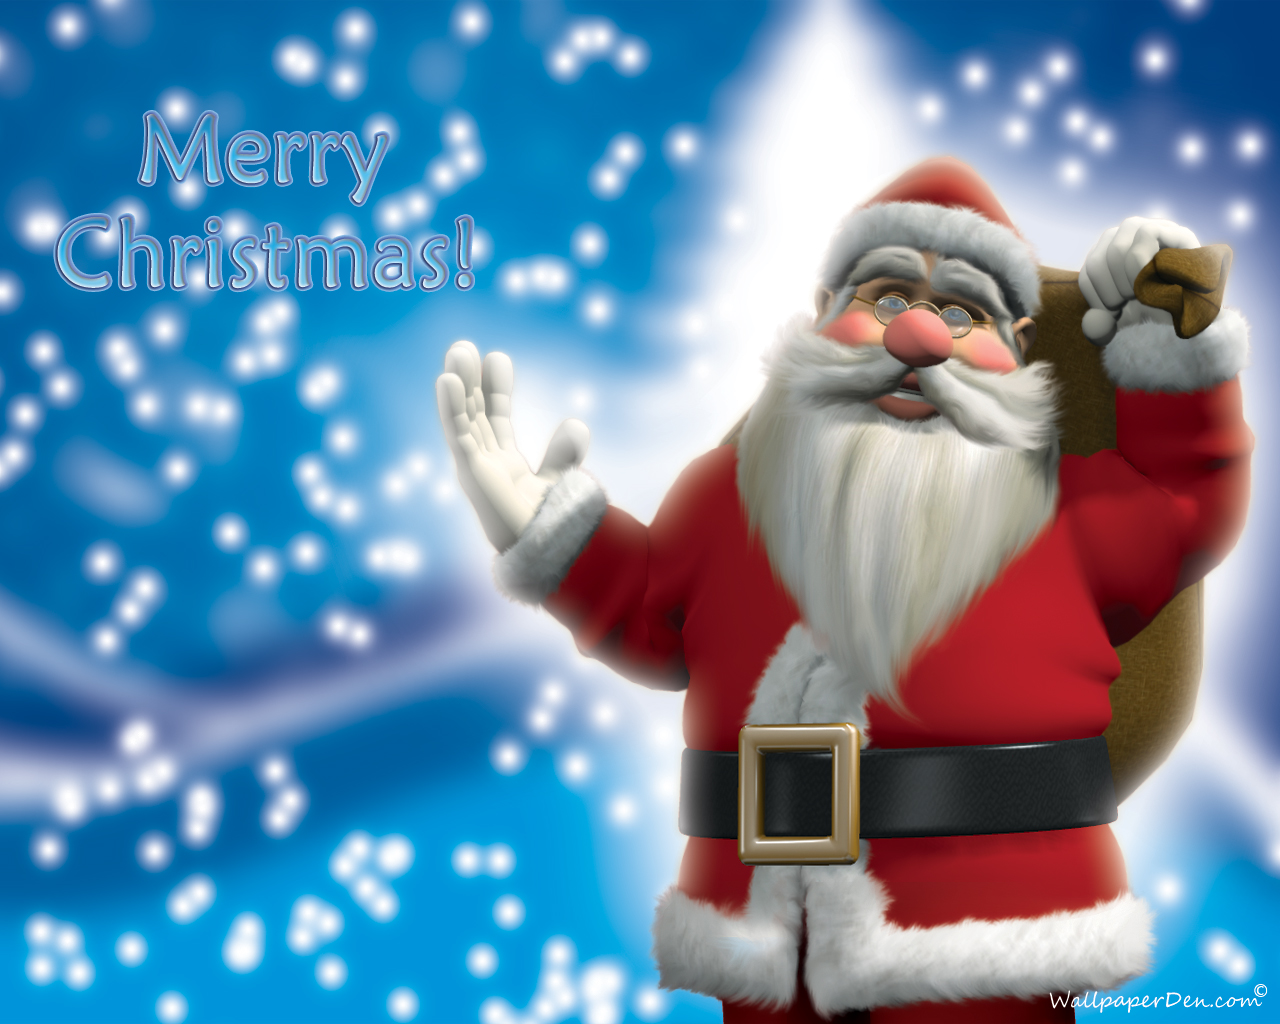 Merry Christmas 2016 Wallpapers